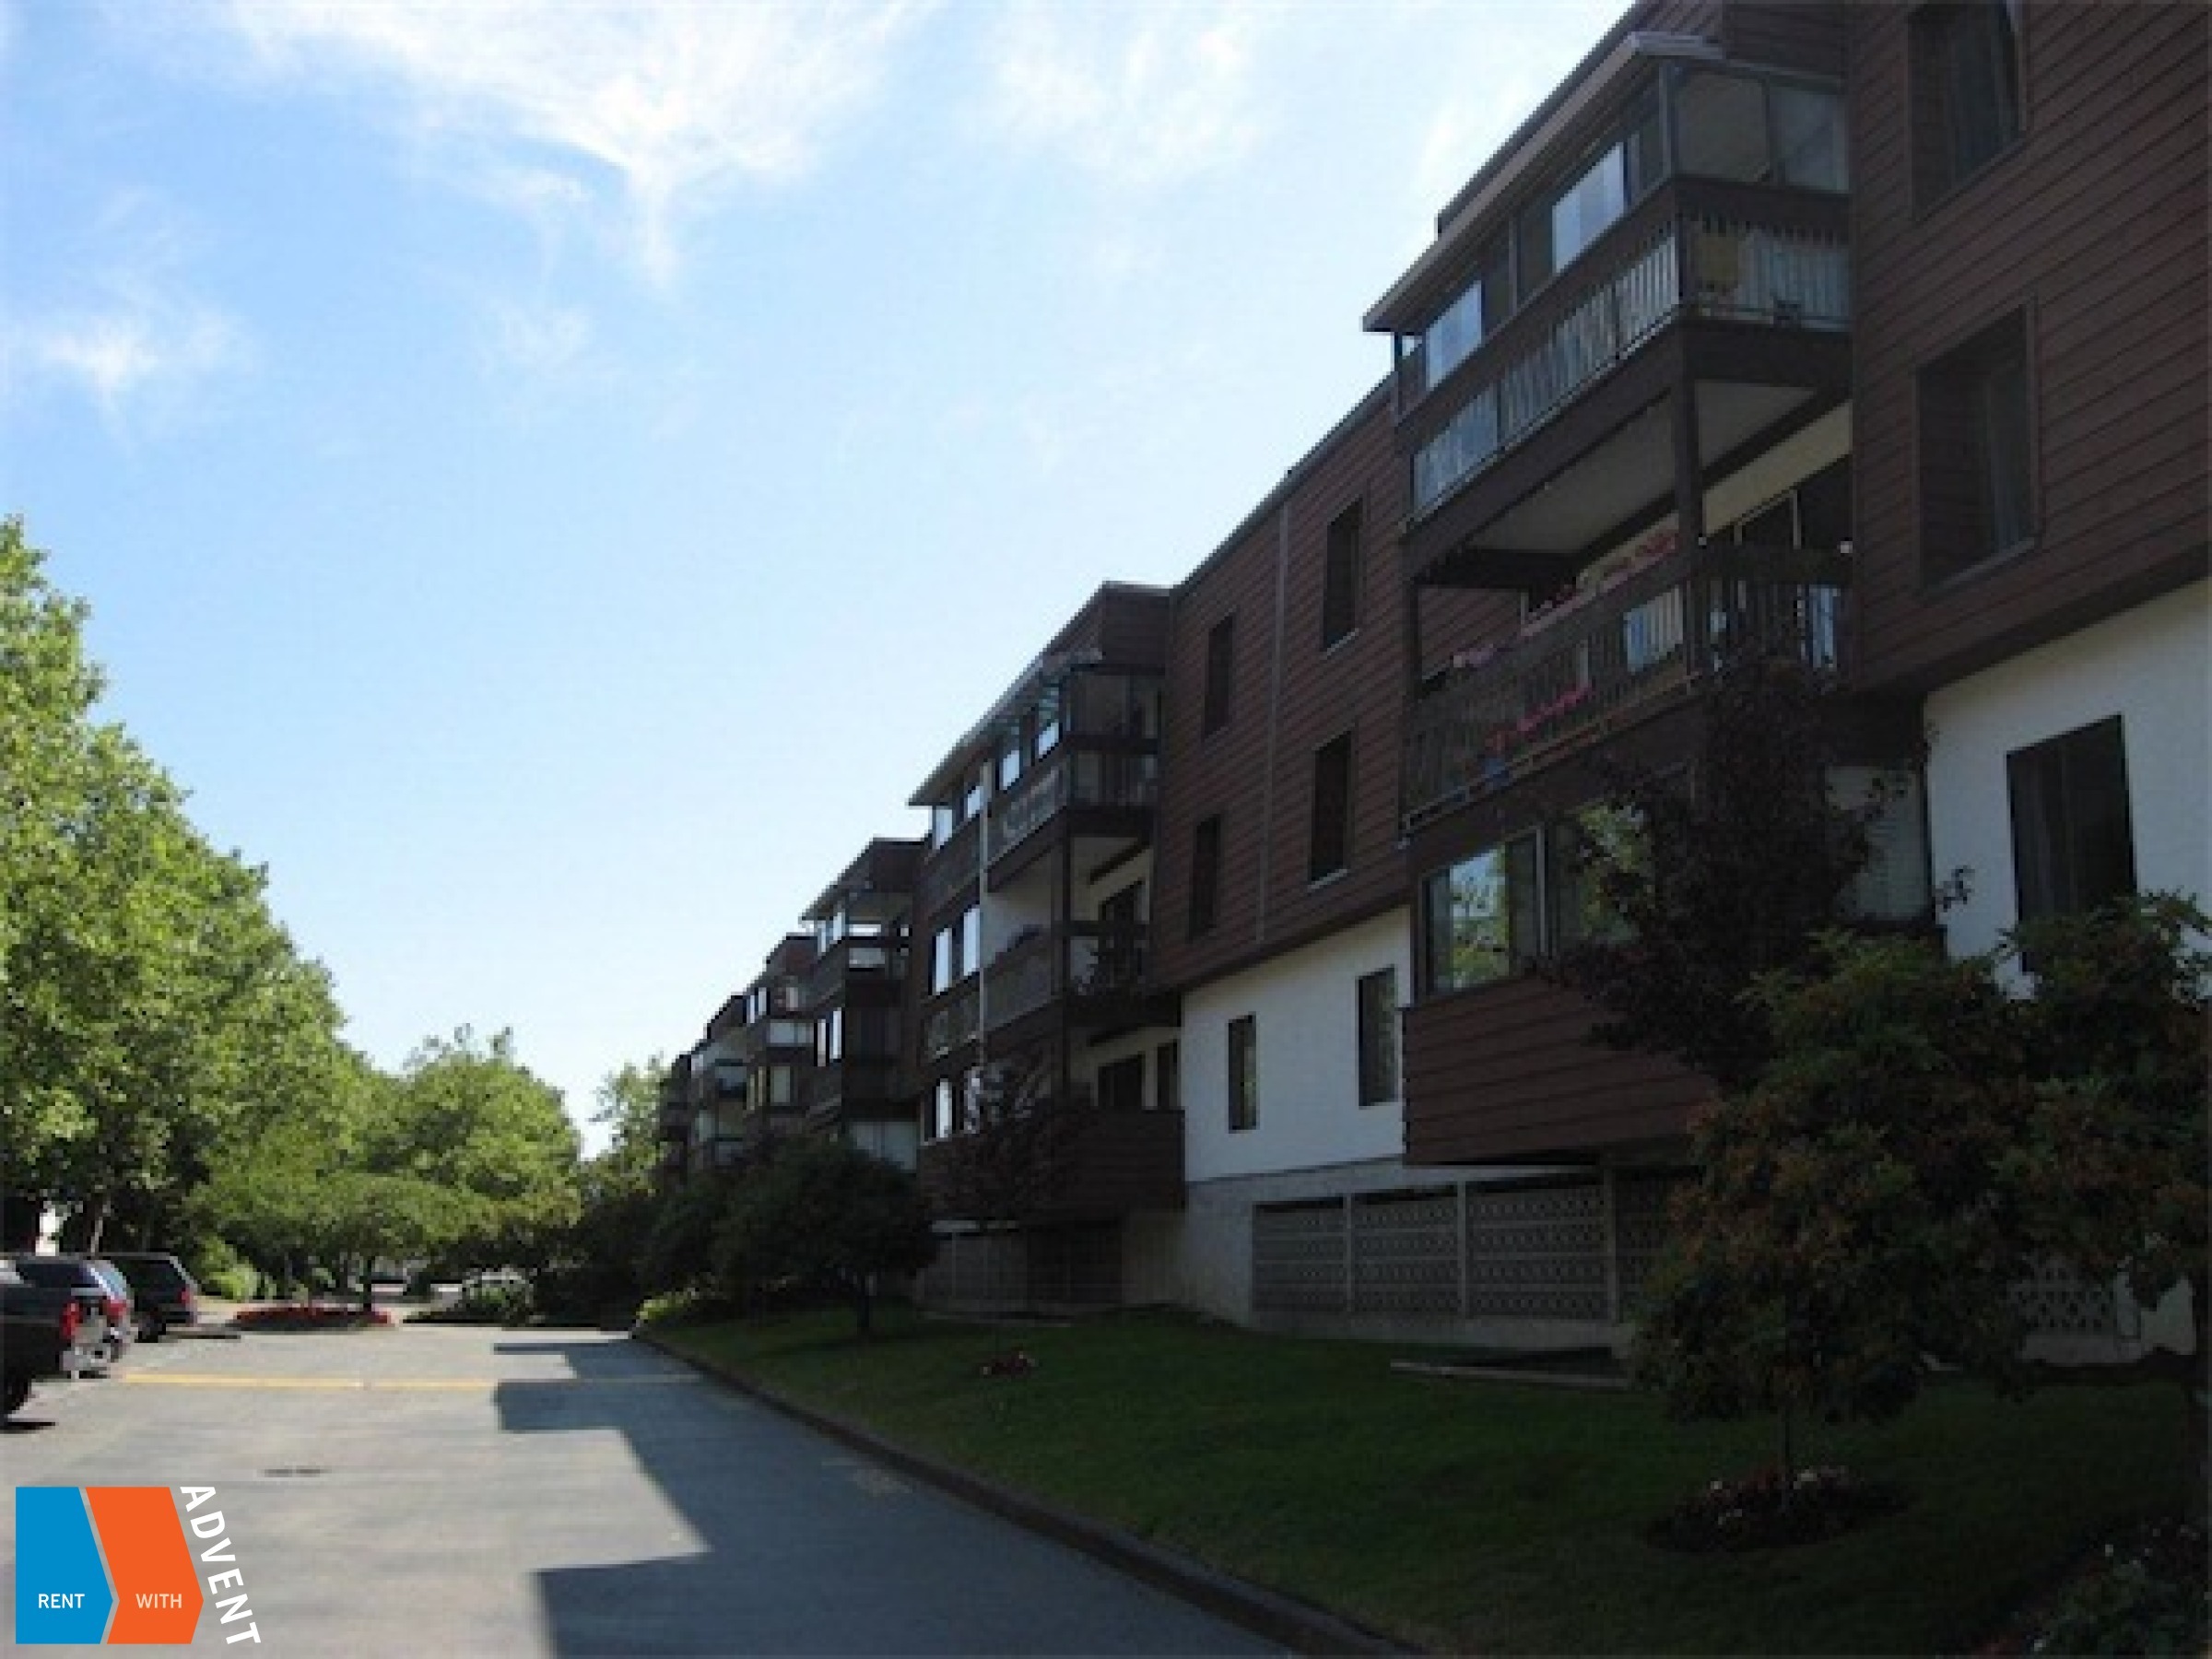 Apple Greene Unfurnished 2 Bedroom Apartment For Rent in Richmond. 8860 No 1 Road, Richmond, BC, Canada.